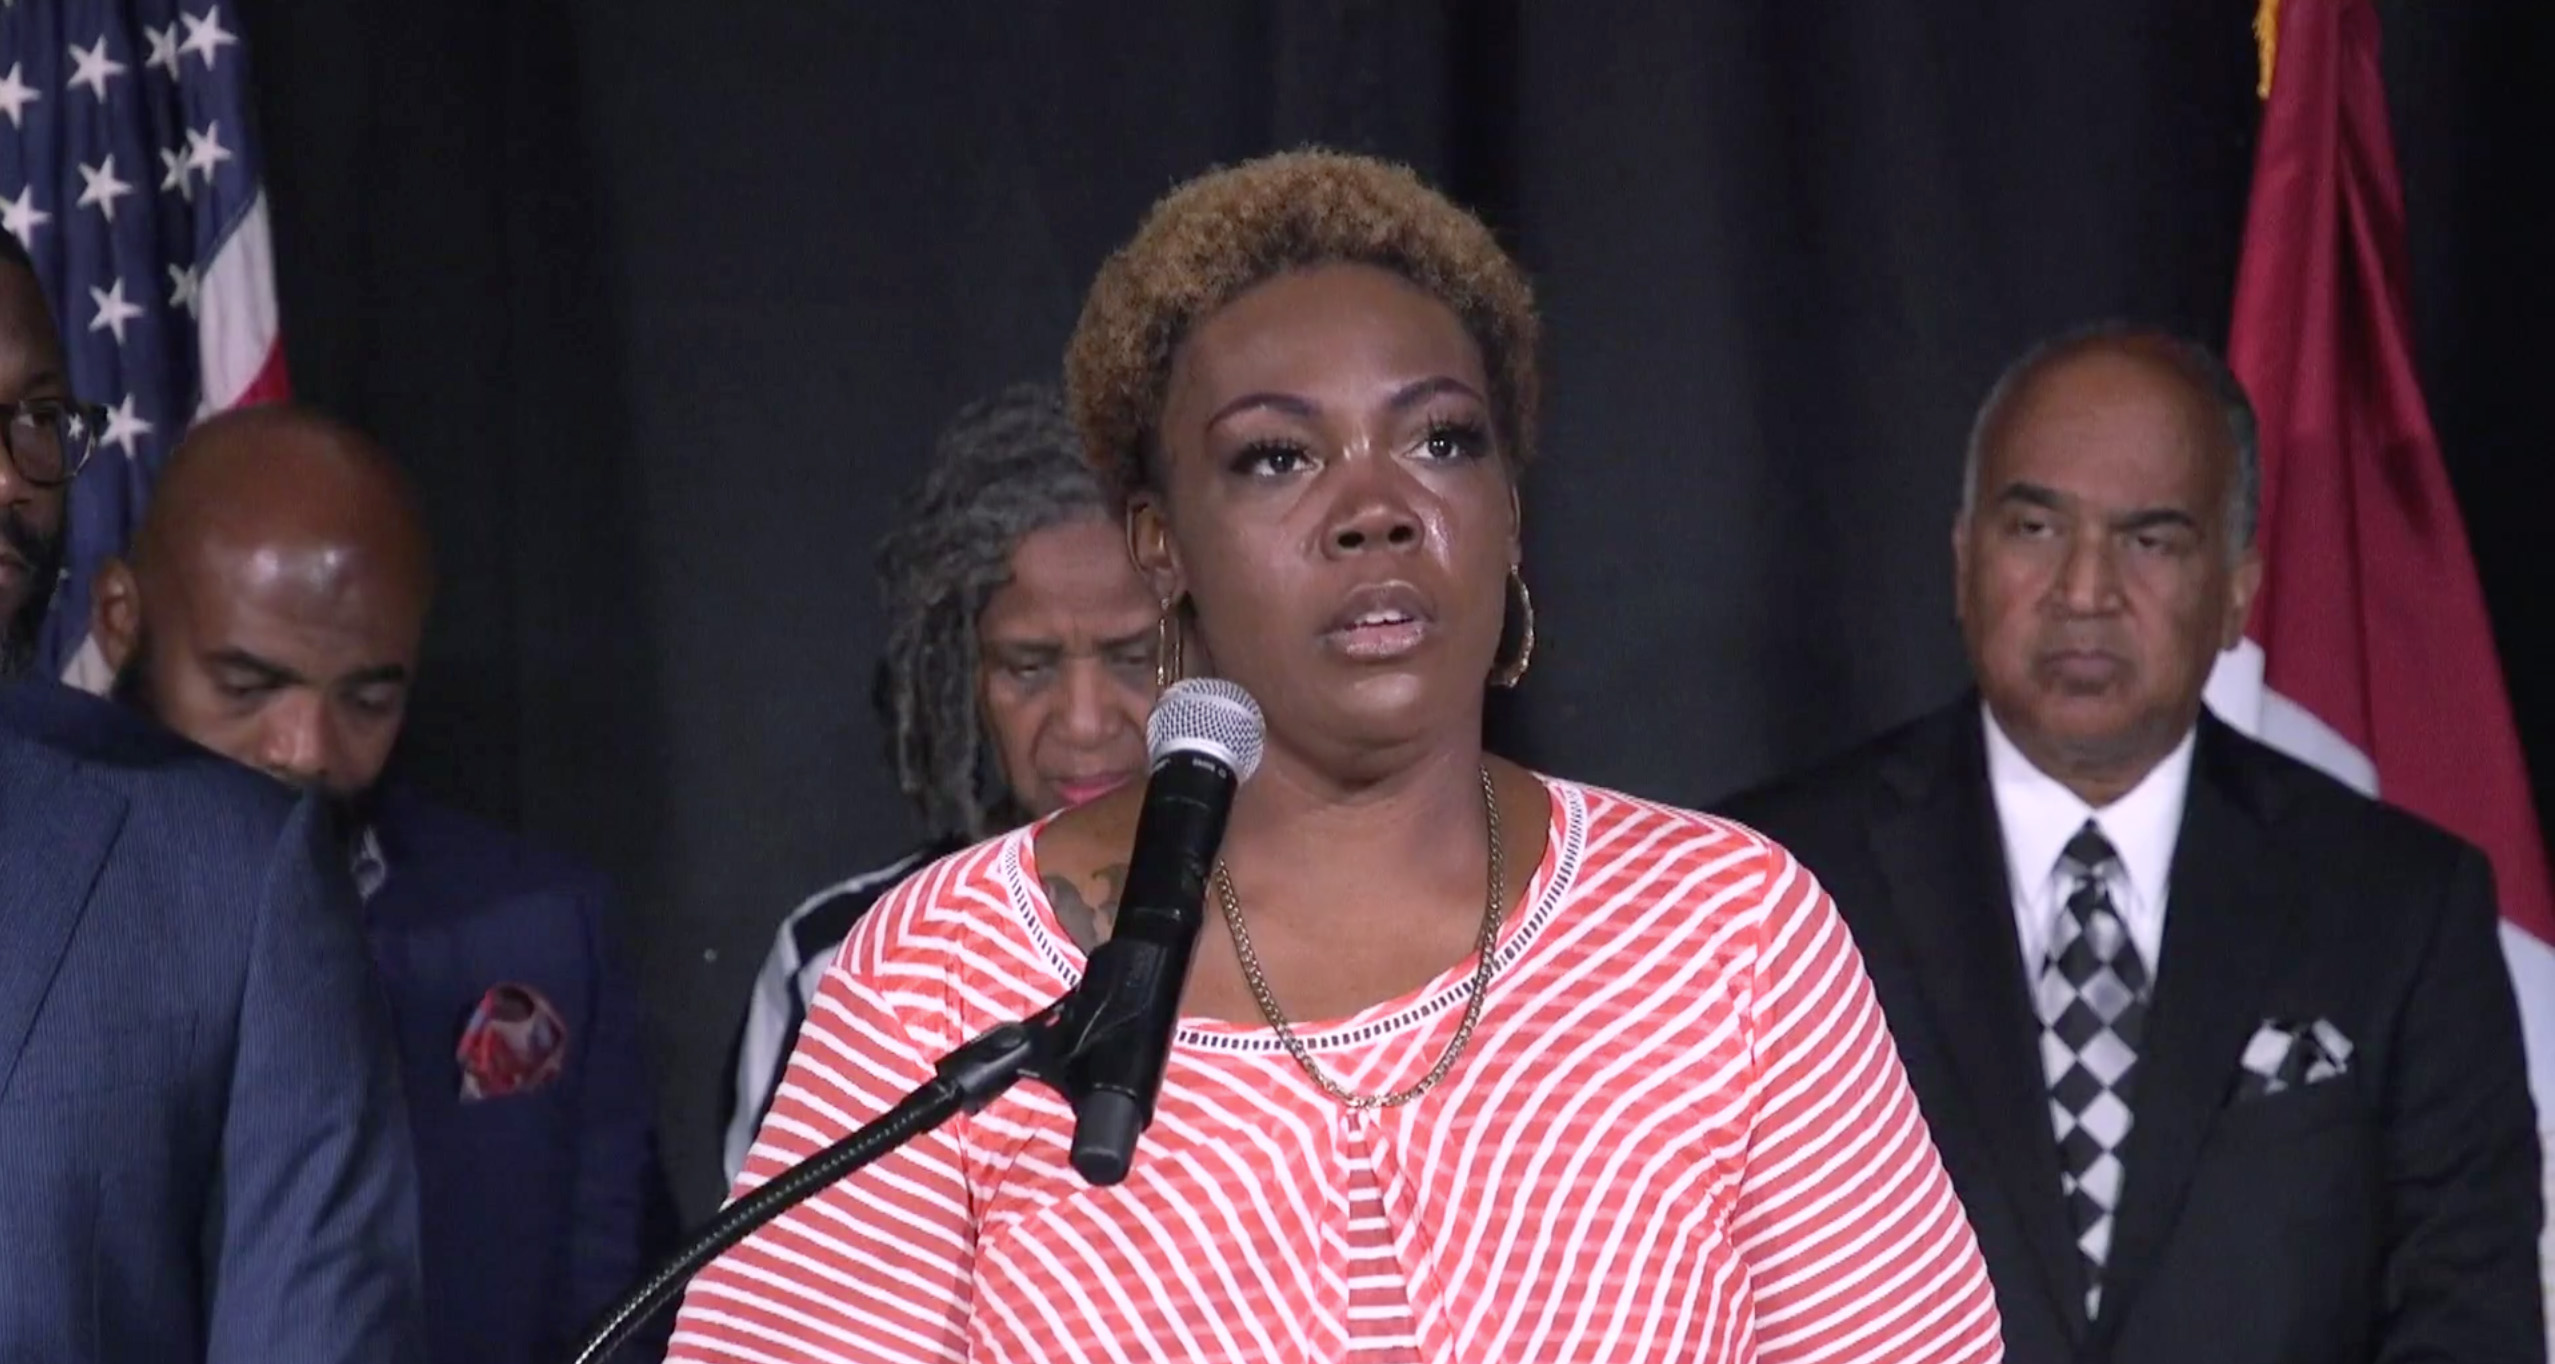 PHOTO: Katrina Grady, the mother of the 8-year-old girl who was shot and injured on May 18, opened up on the terrifying incident at the press conference, June 8, 2021, in Birmingham.